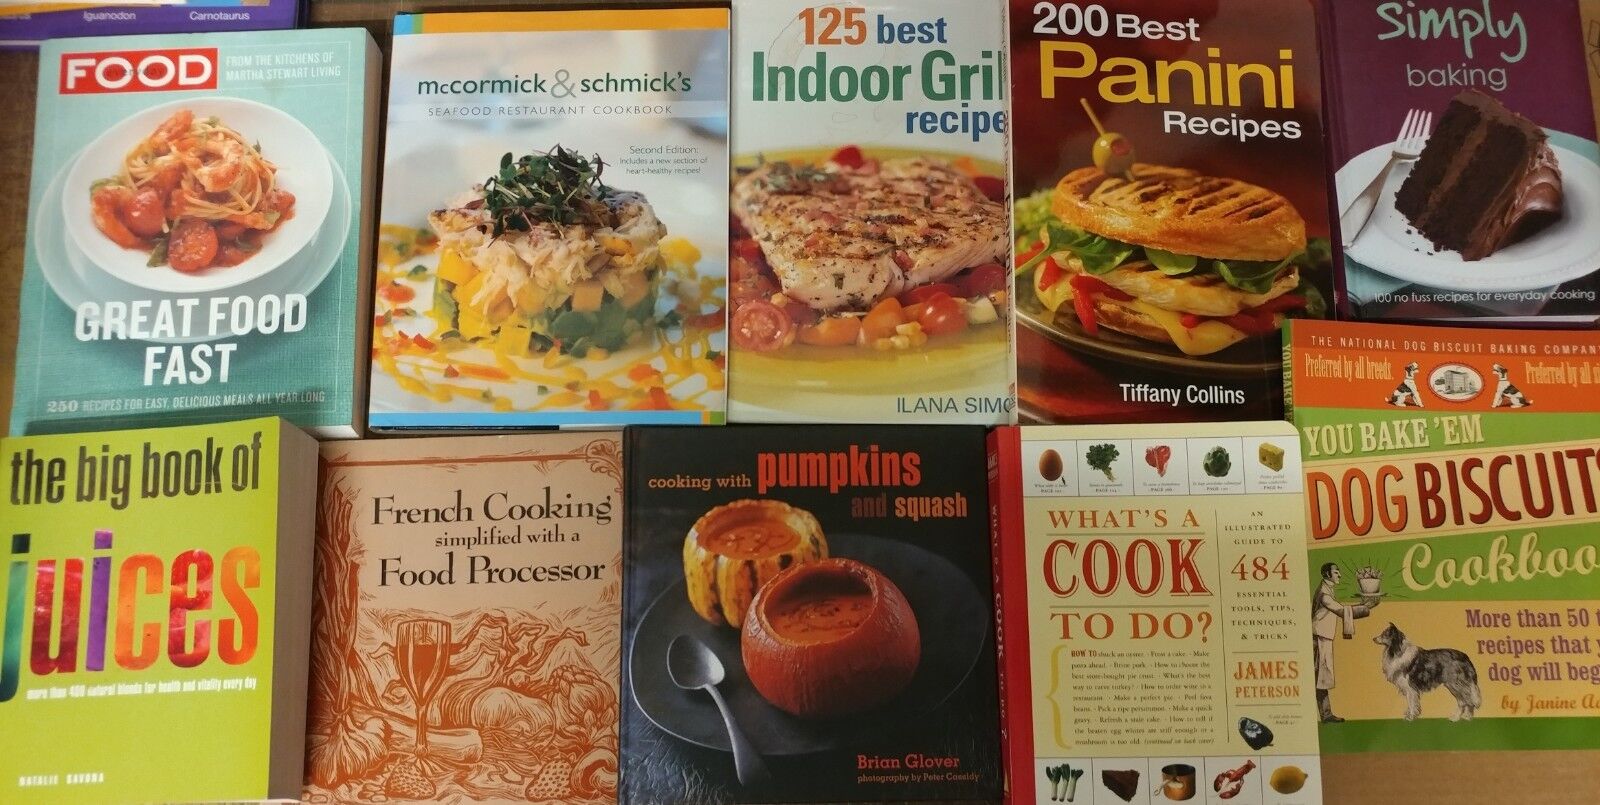 Lot of 20 Cooking Baking Recipe Grilling Low-Fat Ingredient Books MIX-UNSORTED Без бренда - фотография #11